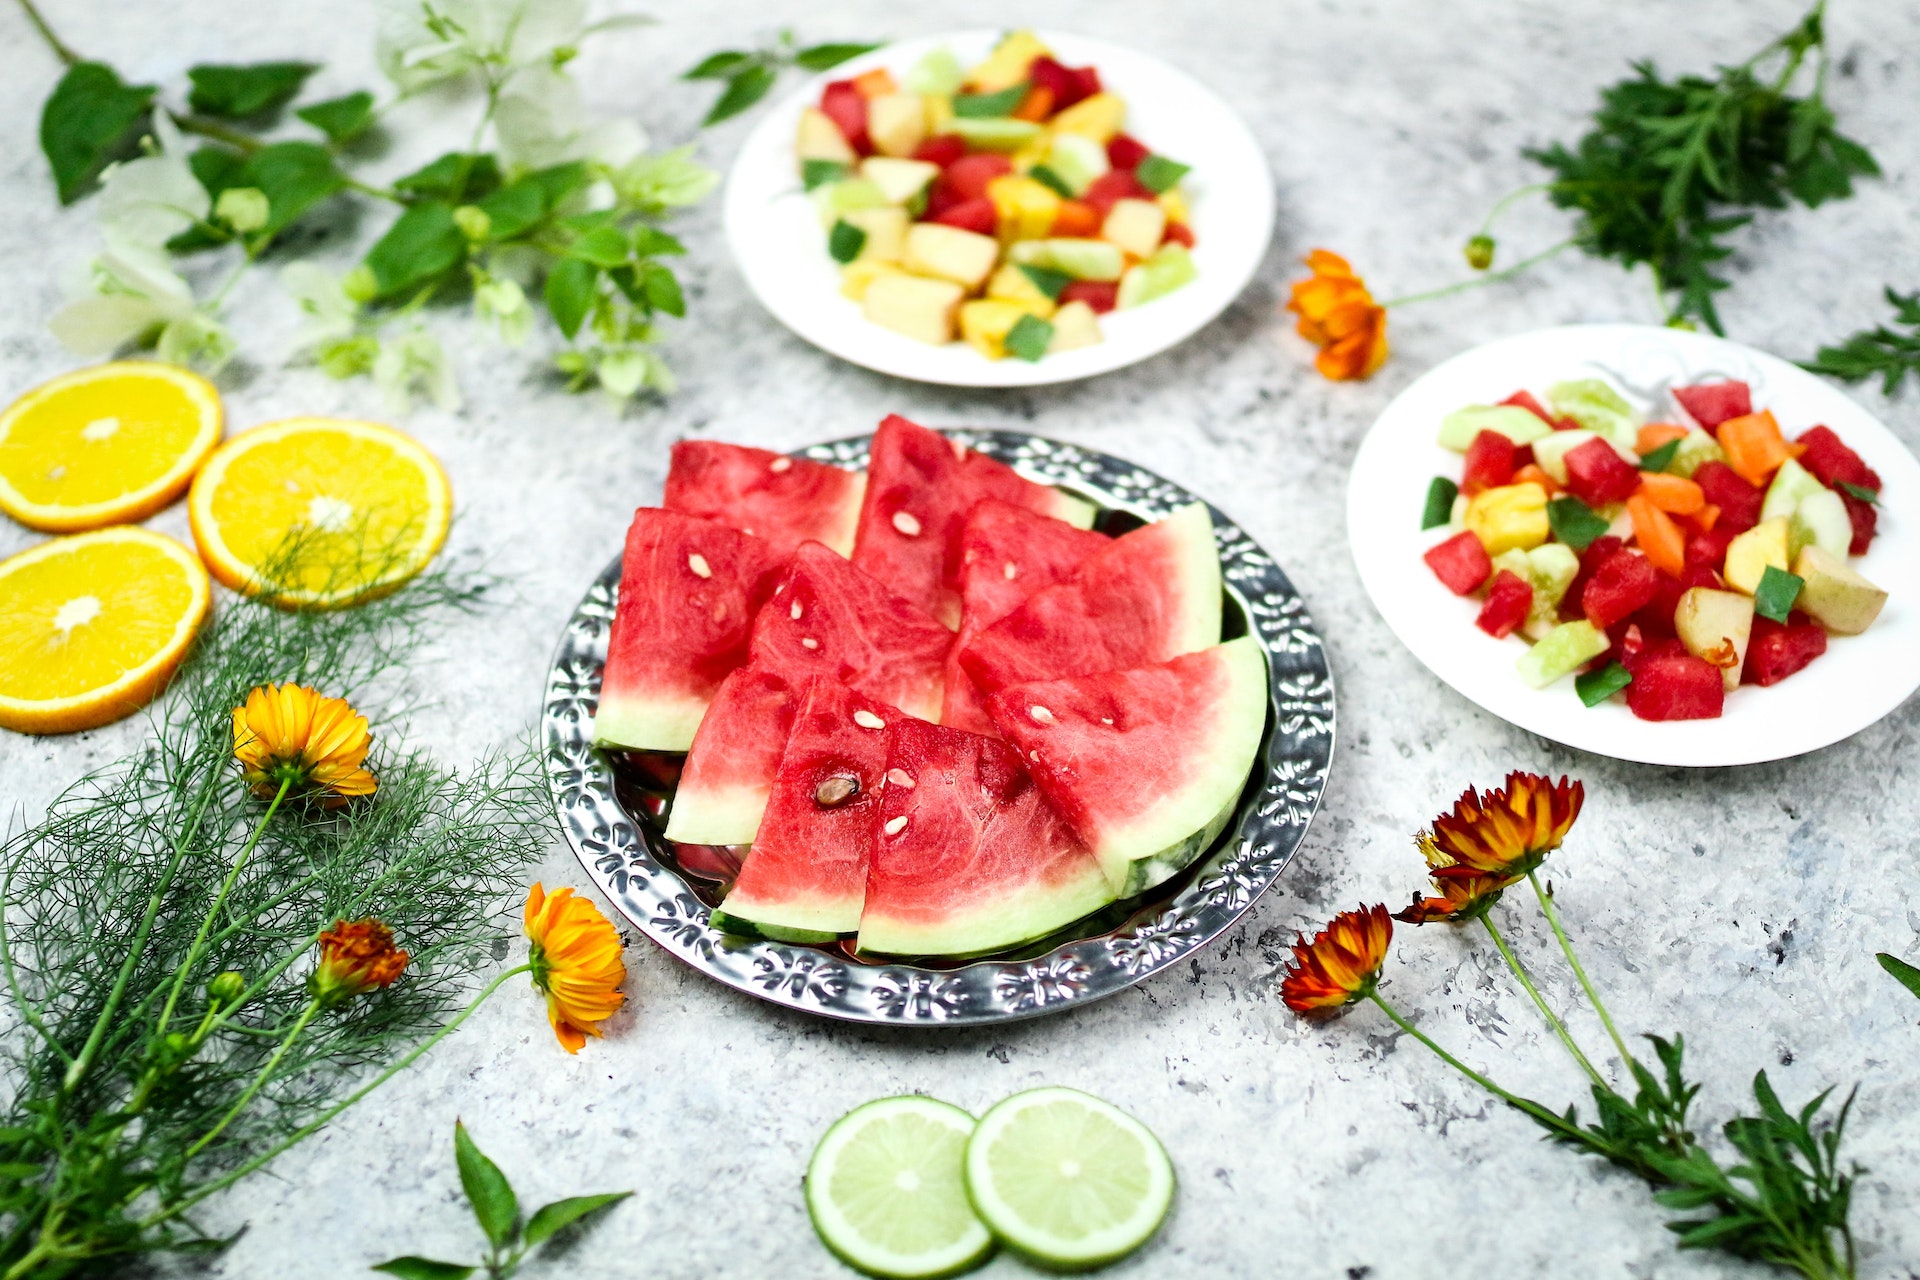 Delicious and Nutritious: Three Healthy Staple Dishes to Keep You Cool This Summer